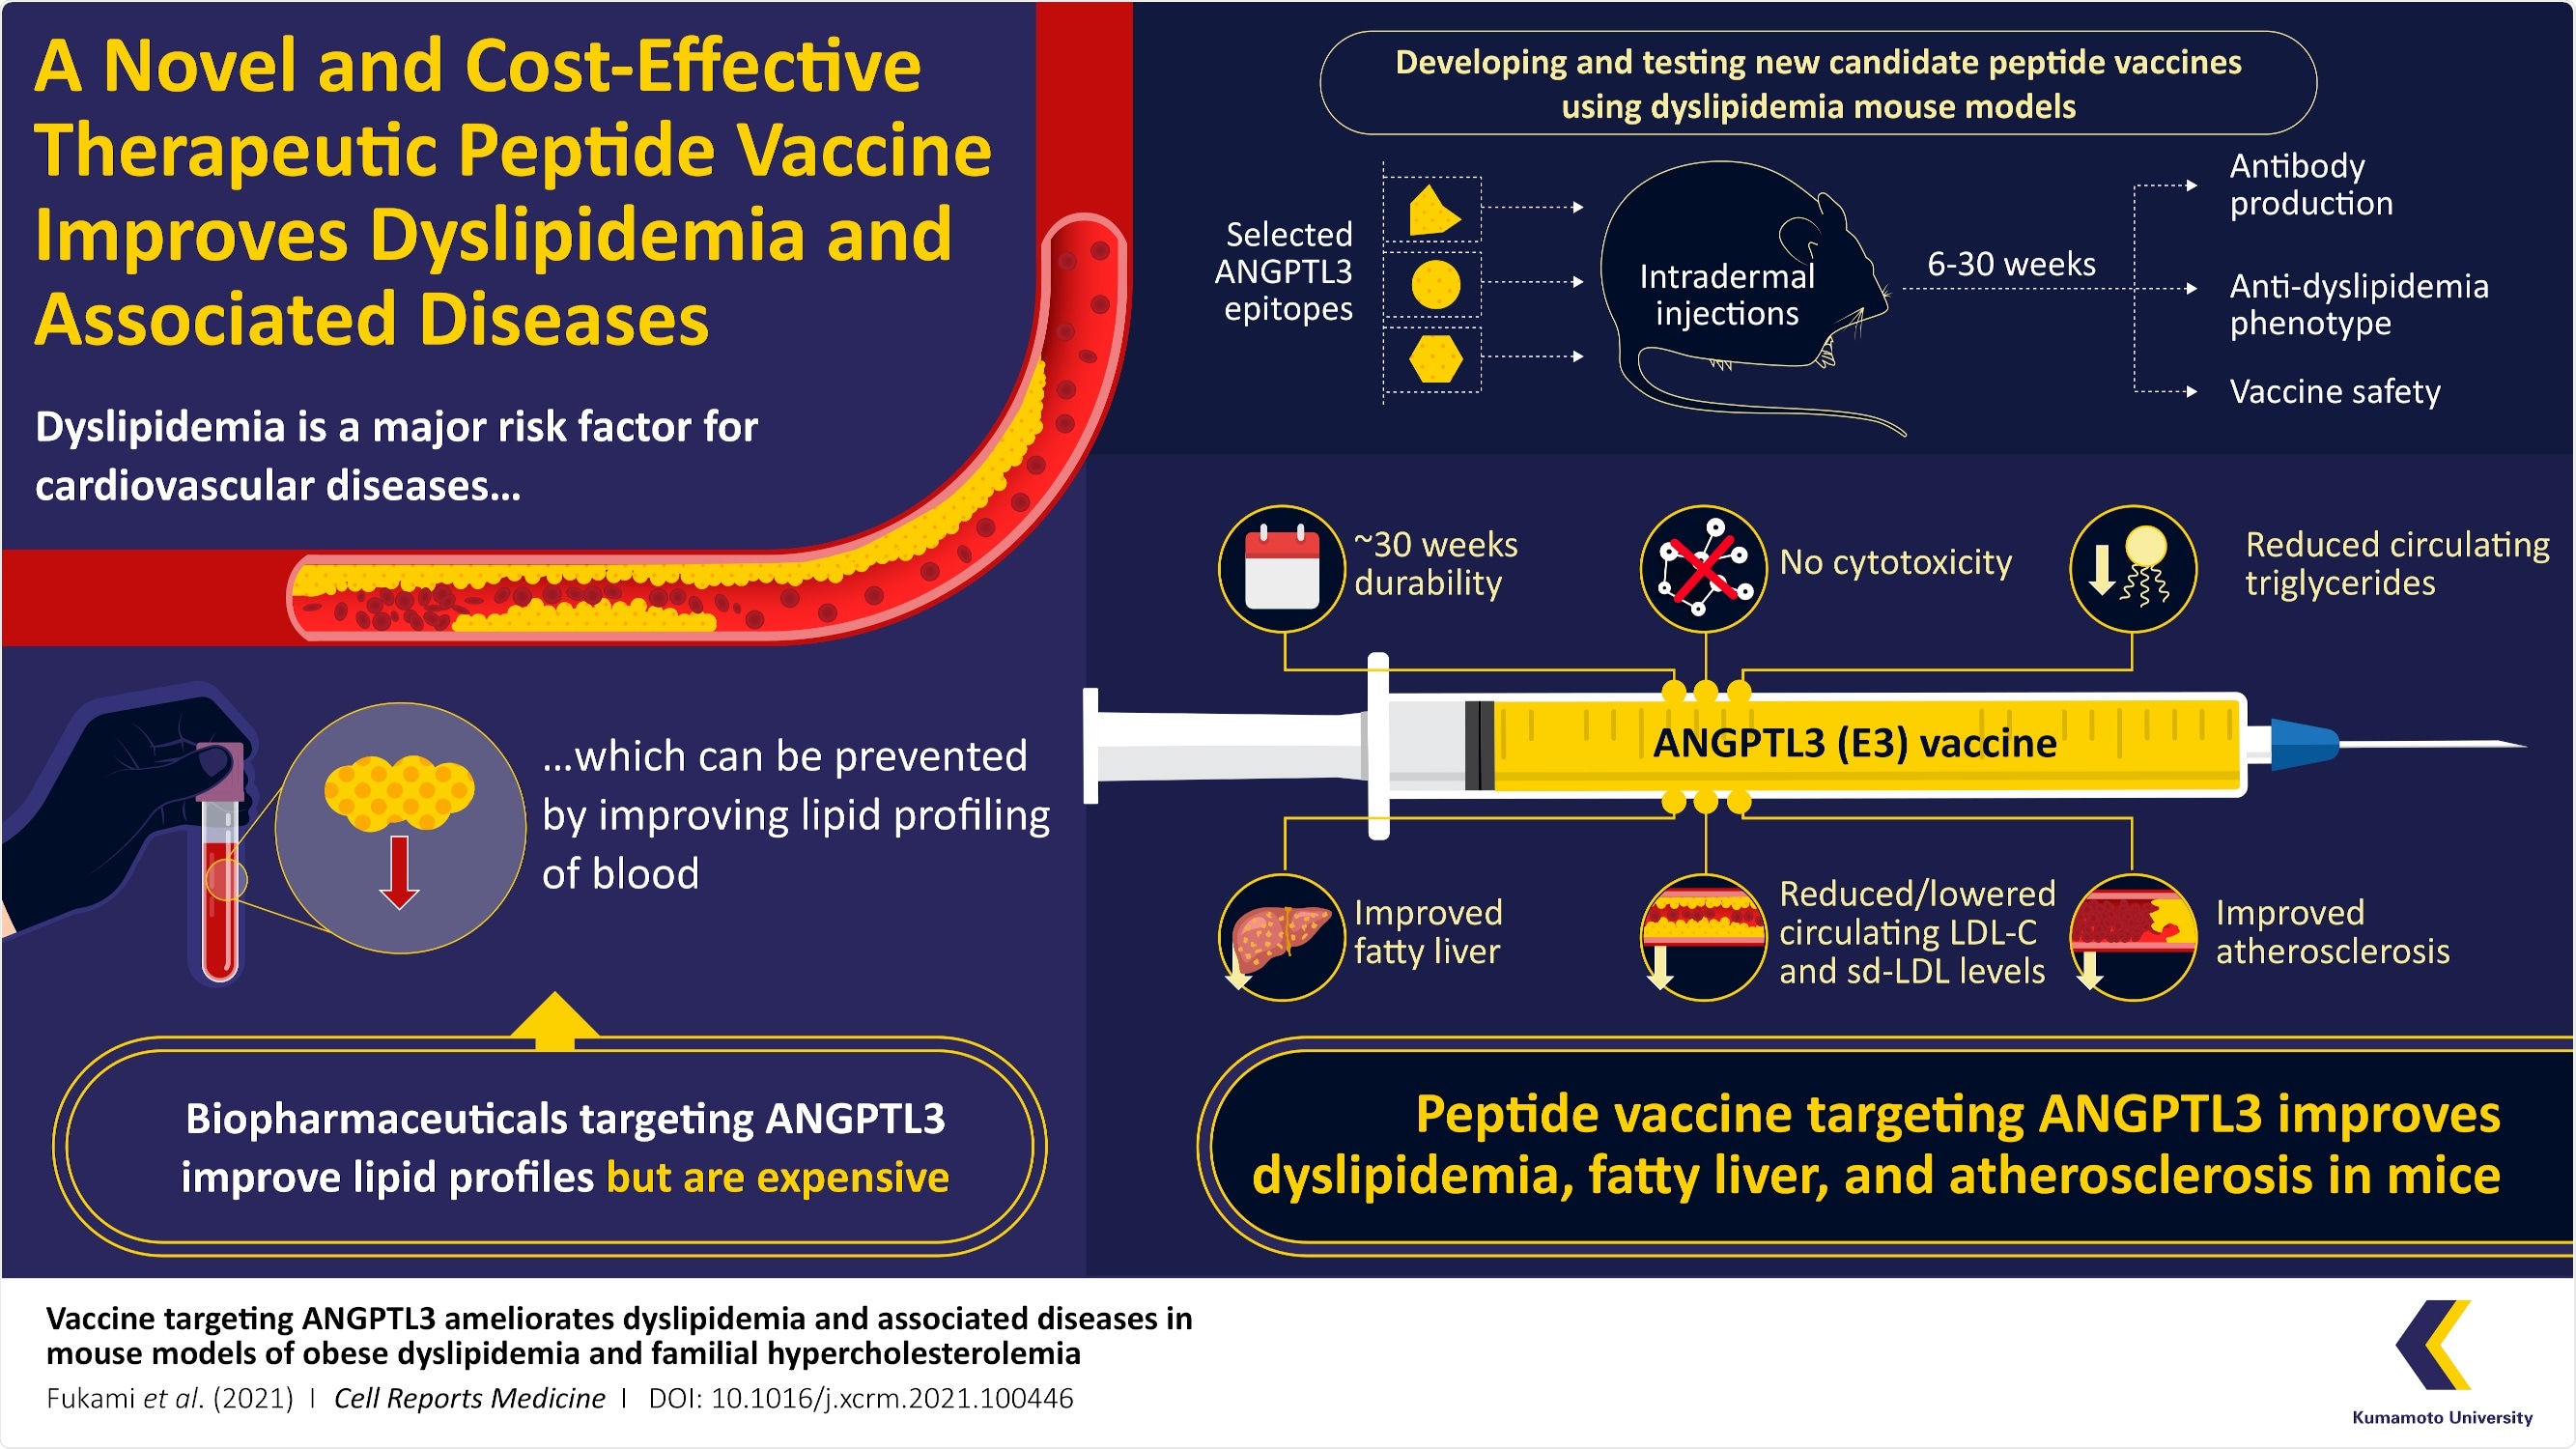 Novel peptide vaccine alleviates conditions of dyslipidemia